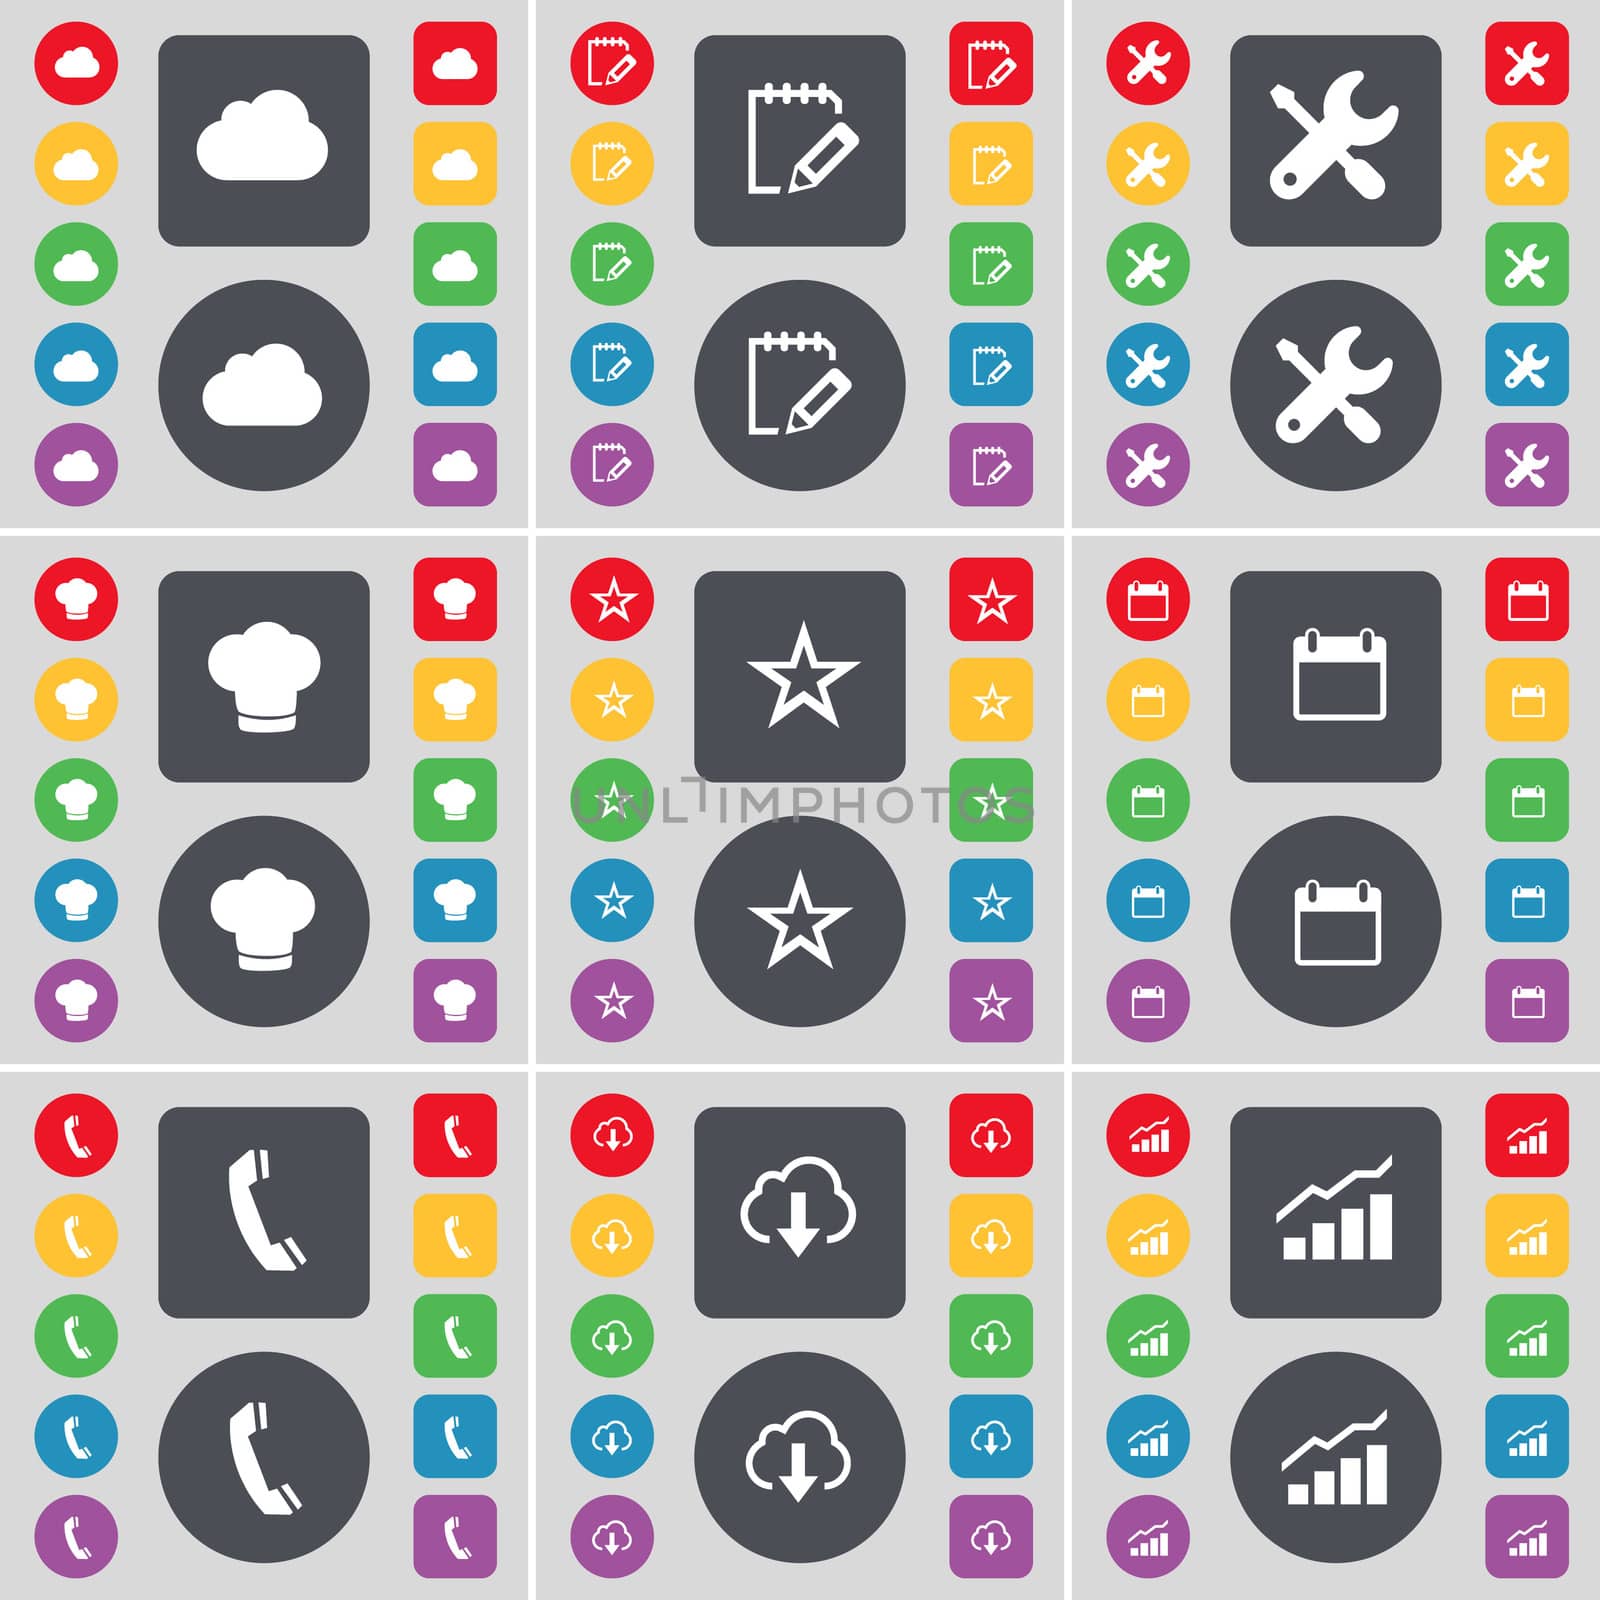 Cloud, Notebook, Wrench, Cooking hat, Star, Calendar, Receiver, Cloud, Graph icon symbol. A large set of flat, colored buttons for your design.  by serhii_lohvyniuk